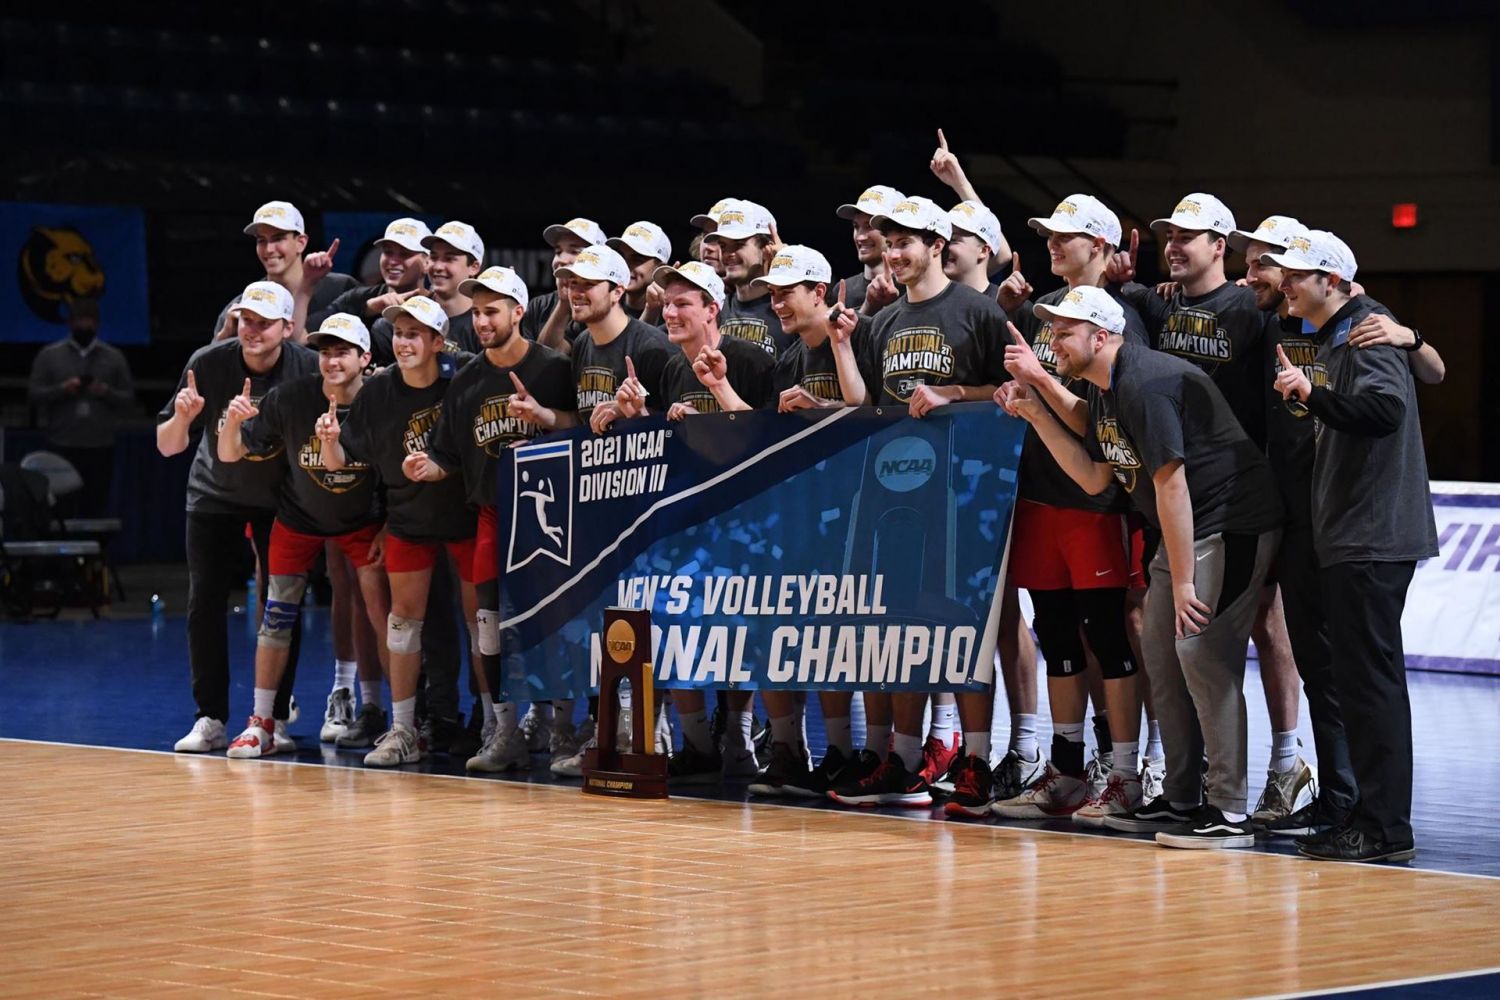 The Carthage men?s volleyball team won the program?s first national championship in 2021!